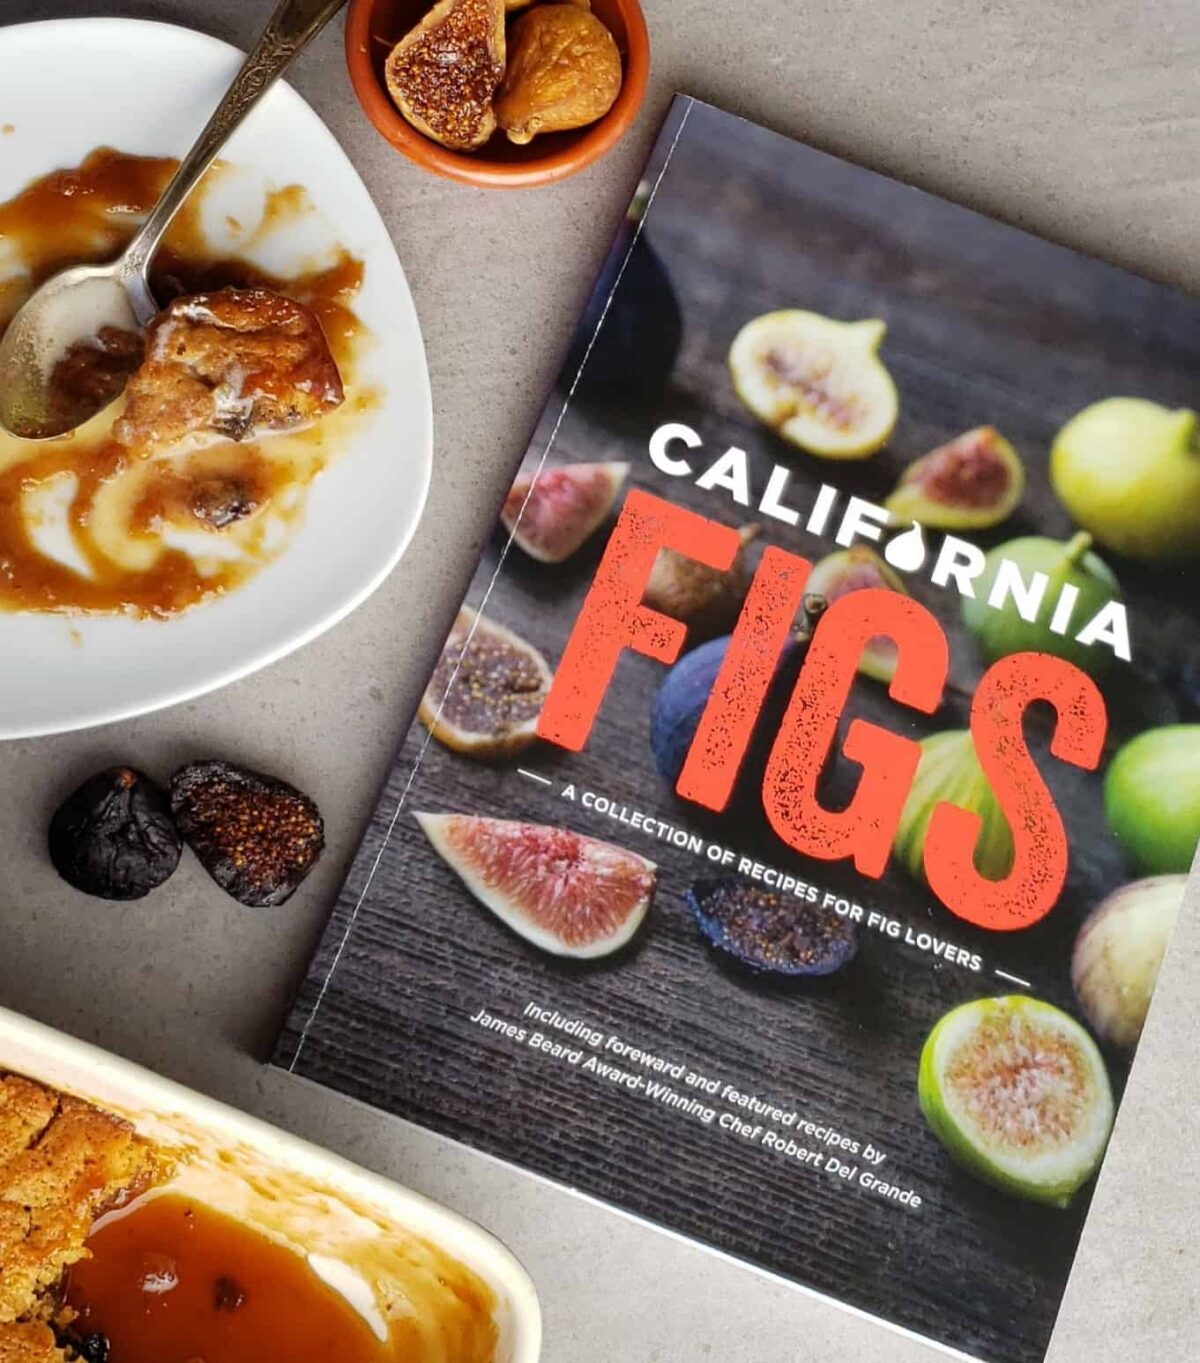 cookbook California Figs with plate of half eaten cake